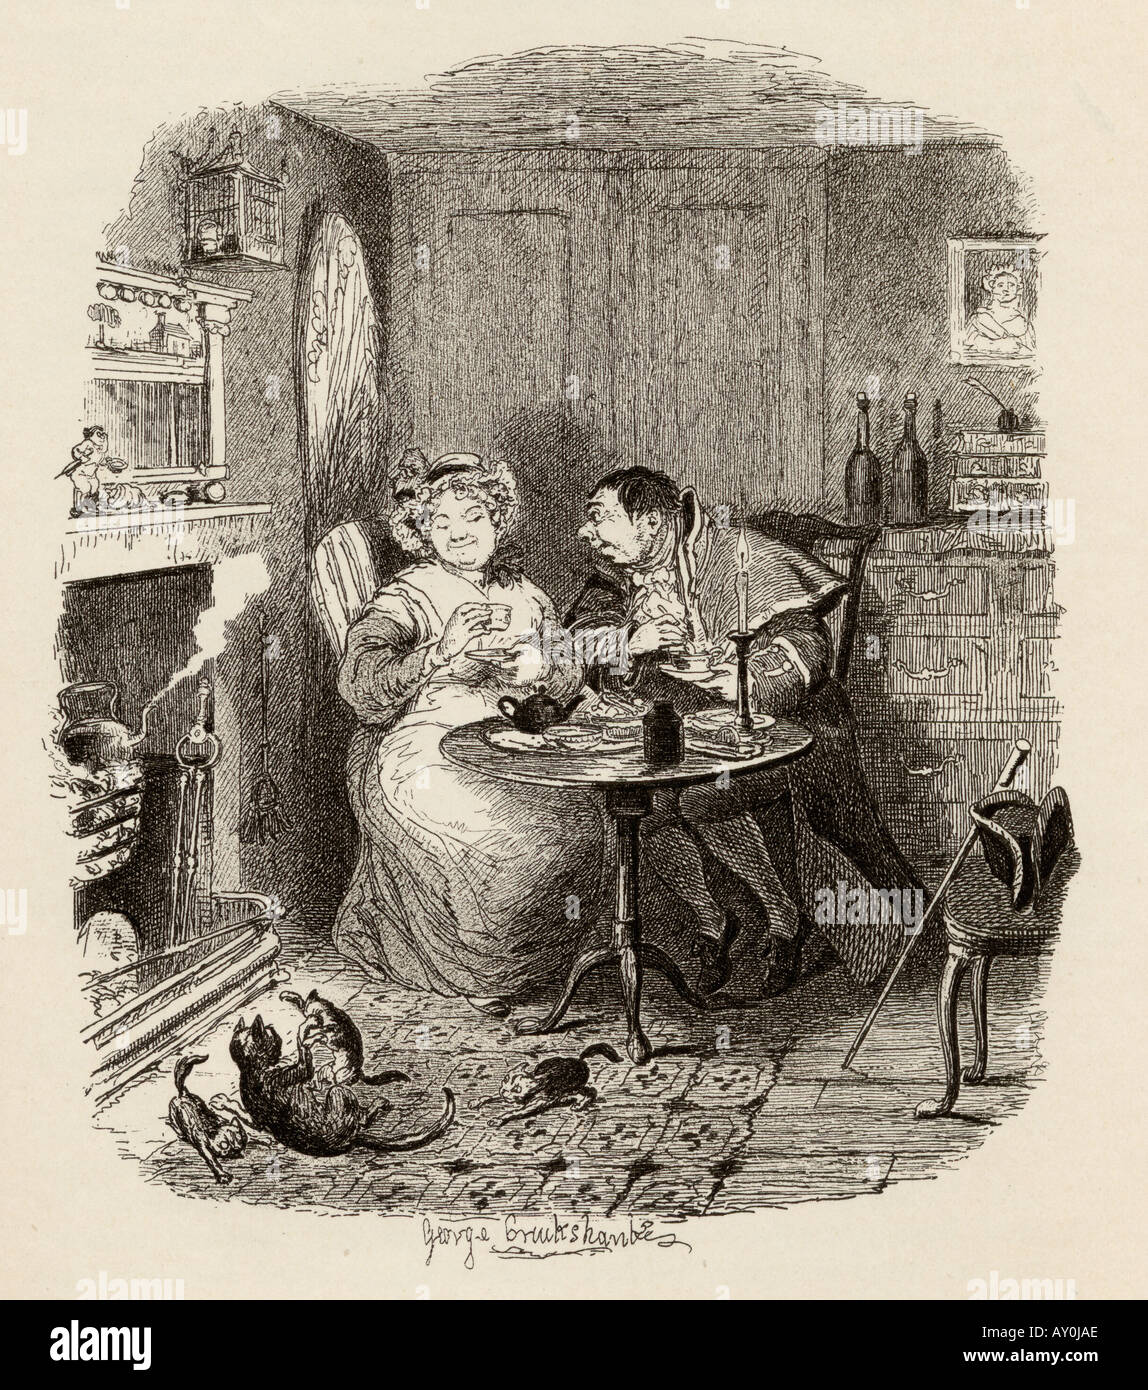 Mr Bumble and Mrs Corney taking tea. From the book The Adventures of Oliver Twist Stock Photo